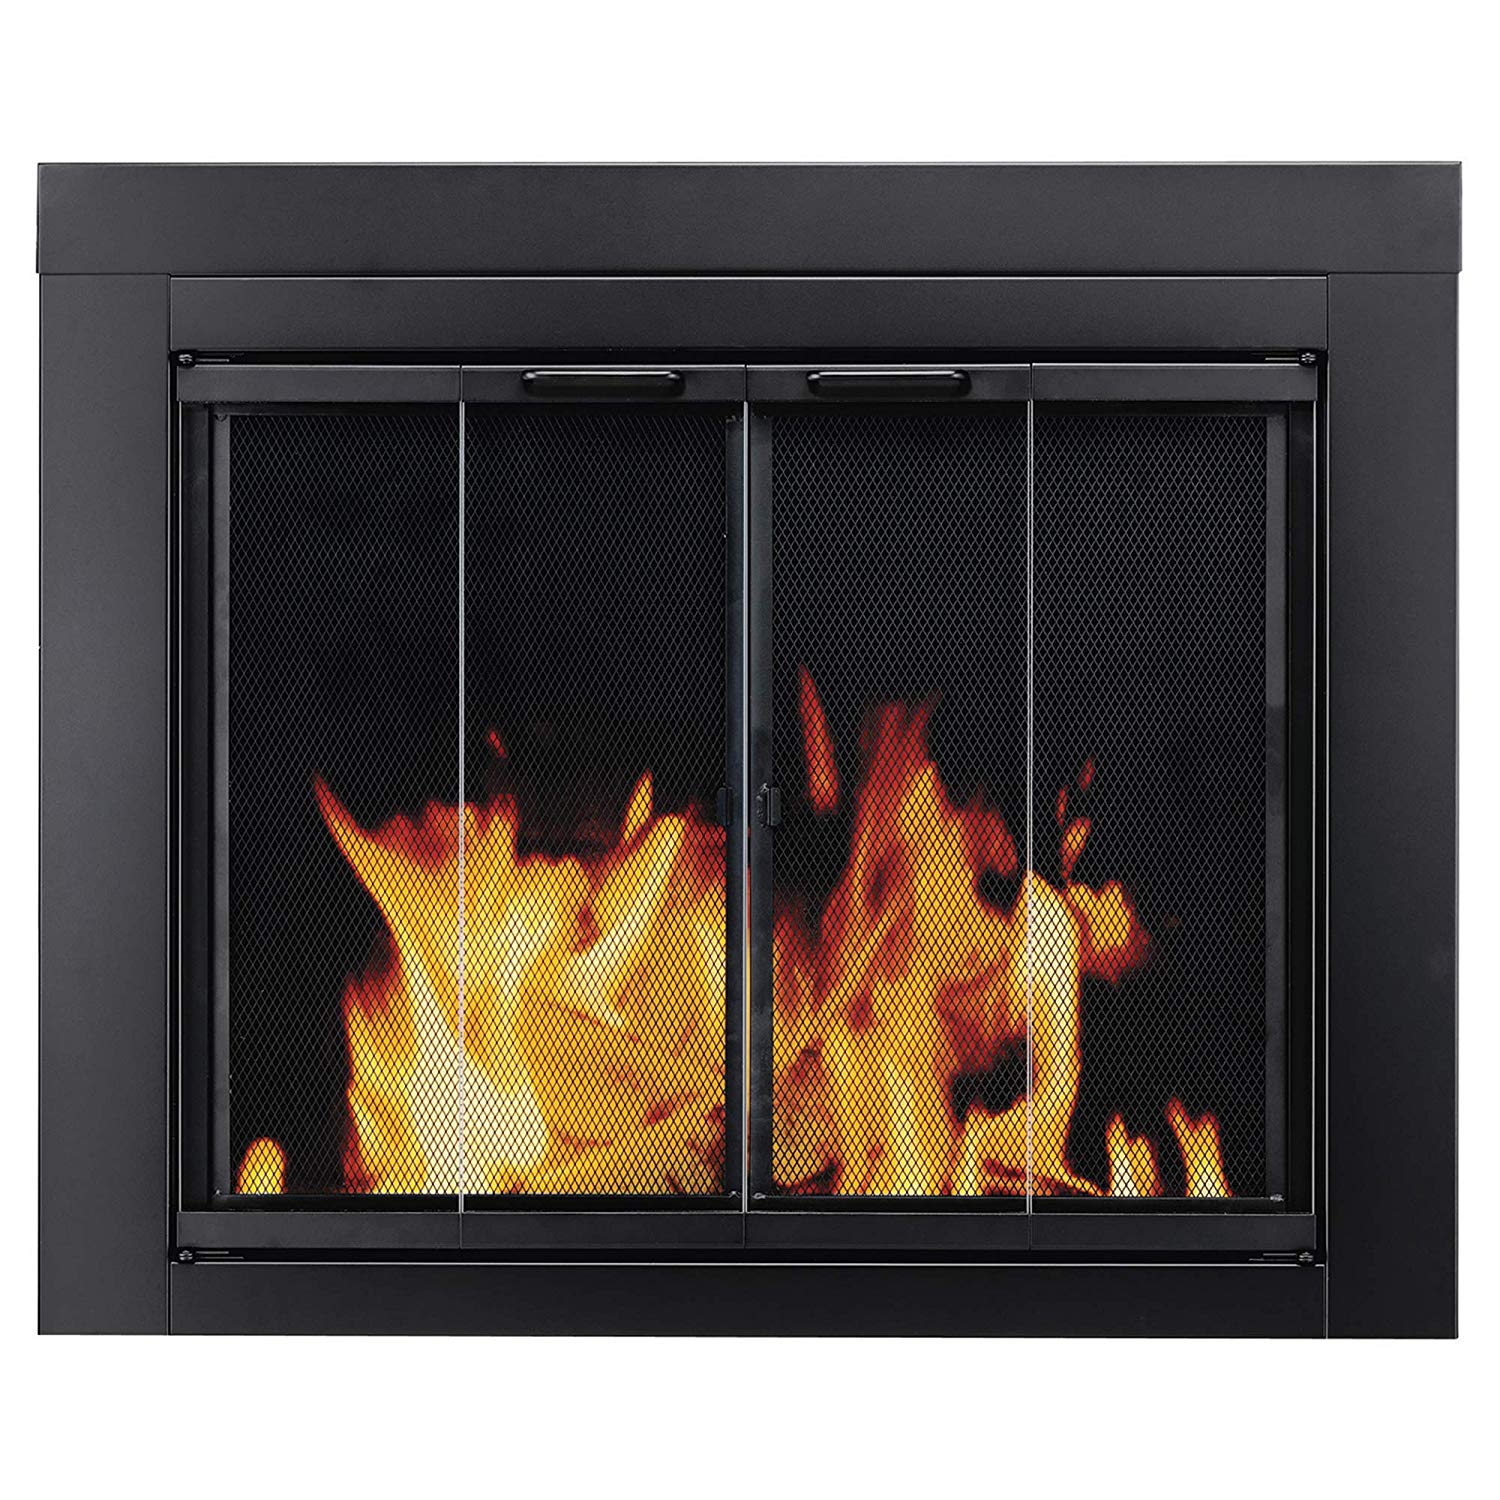 Best Way to Start A Fire In A Fireplace Beautiful Pleasant Hearth at 1000 ascot Fireplace Glass Door Black Small